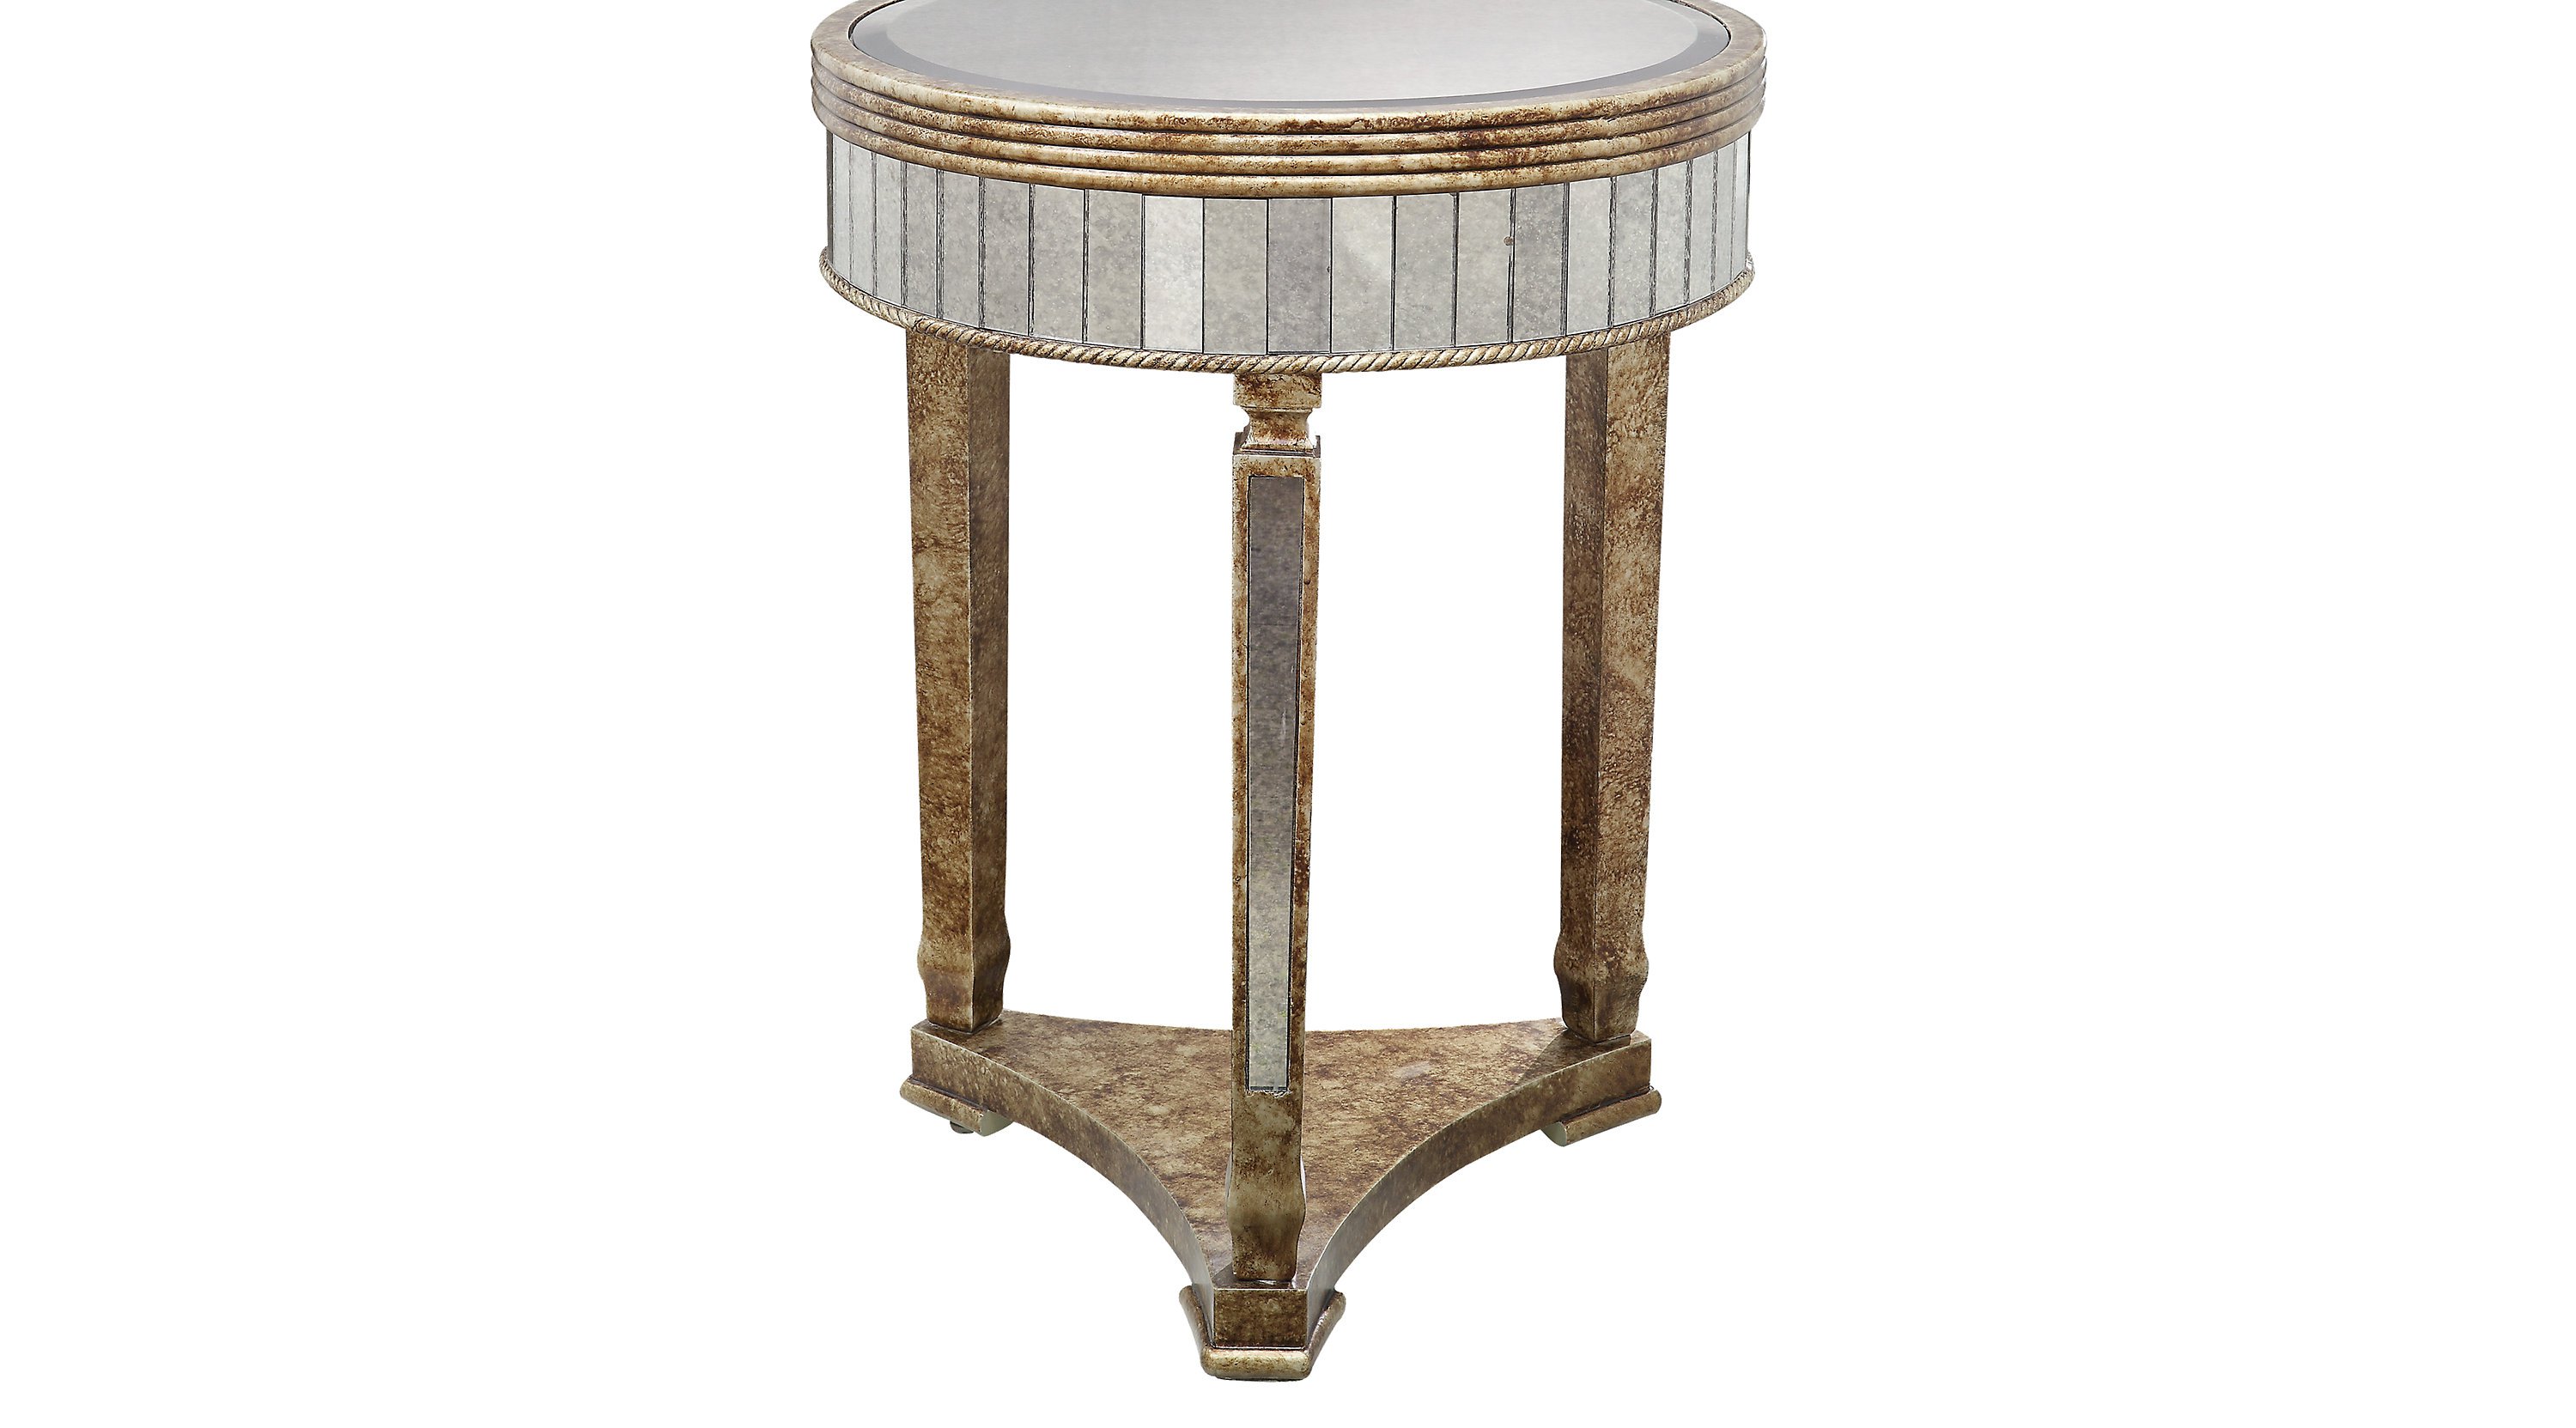 intriguing elevonne accent table gold metal drum unique patio umbrellas tables ikea thin hallway console glass top brass base coffee mission style plans long narrow desk square